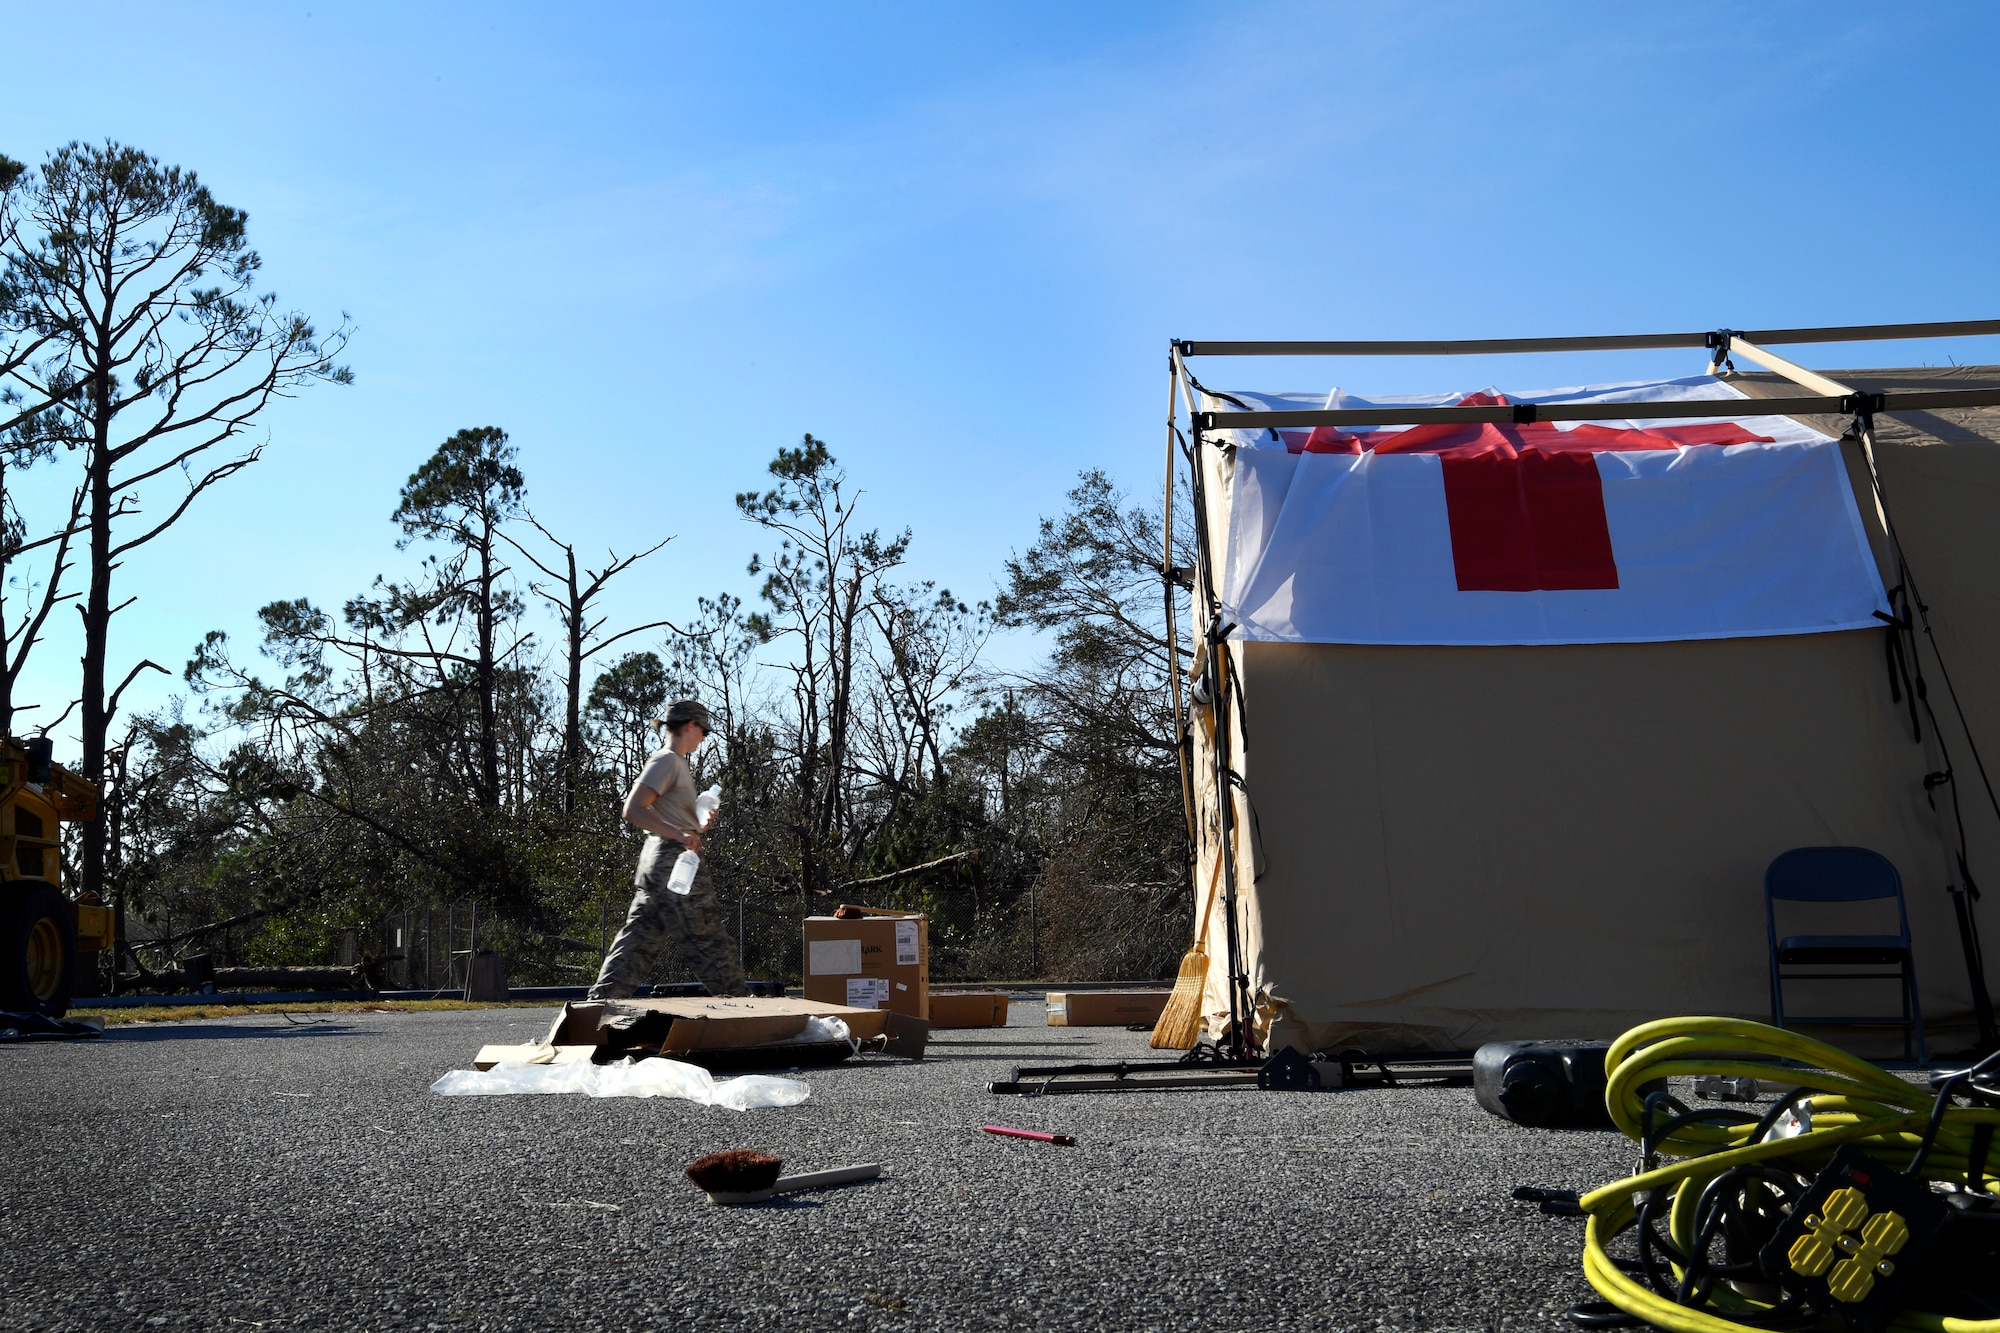 Staff Sgt. Bailey Holt, 96th Medical Group medical technician, unloads medical supplies at Tyndall Air Force Base, Florida, Oct. 15, 2018. Members from Moody Air Force Base travelled down to support standing up an operational medical facility after Hurricane Michael devastated the base. (U.S. Air Force photo by SSgt Matthew Lotz)